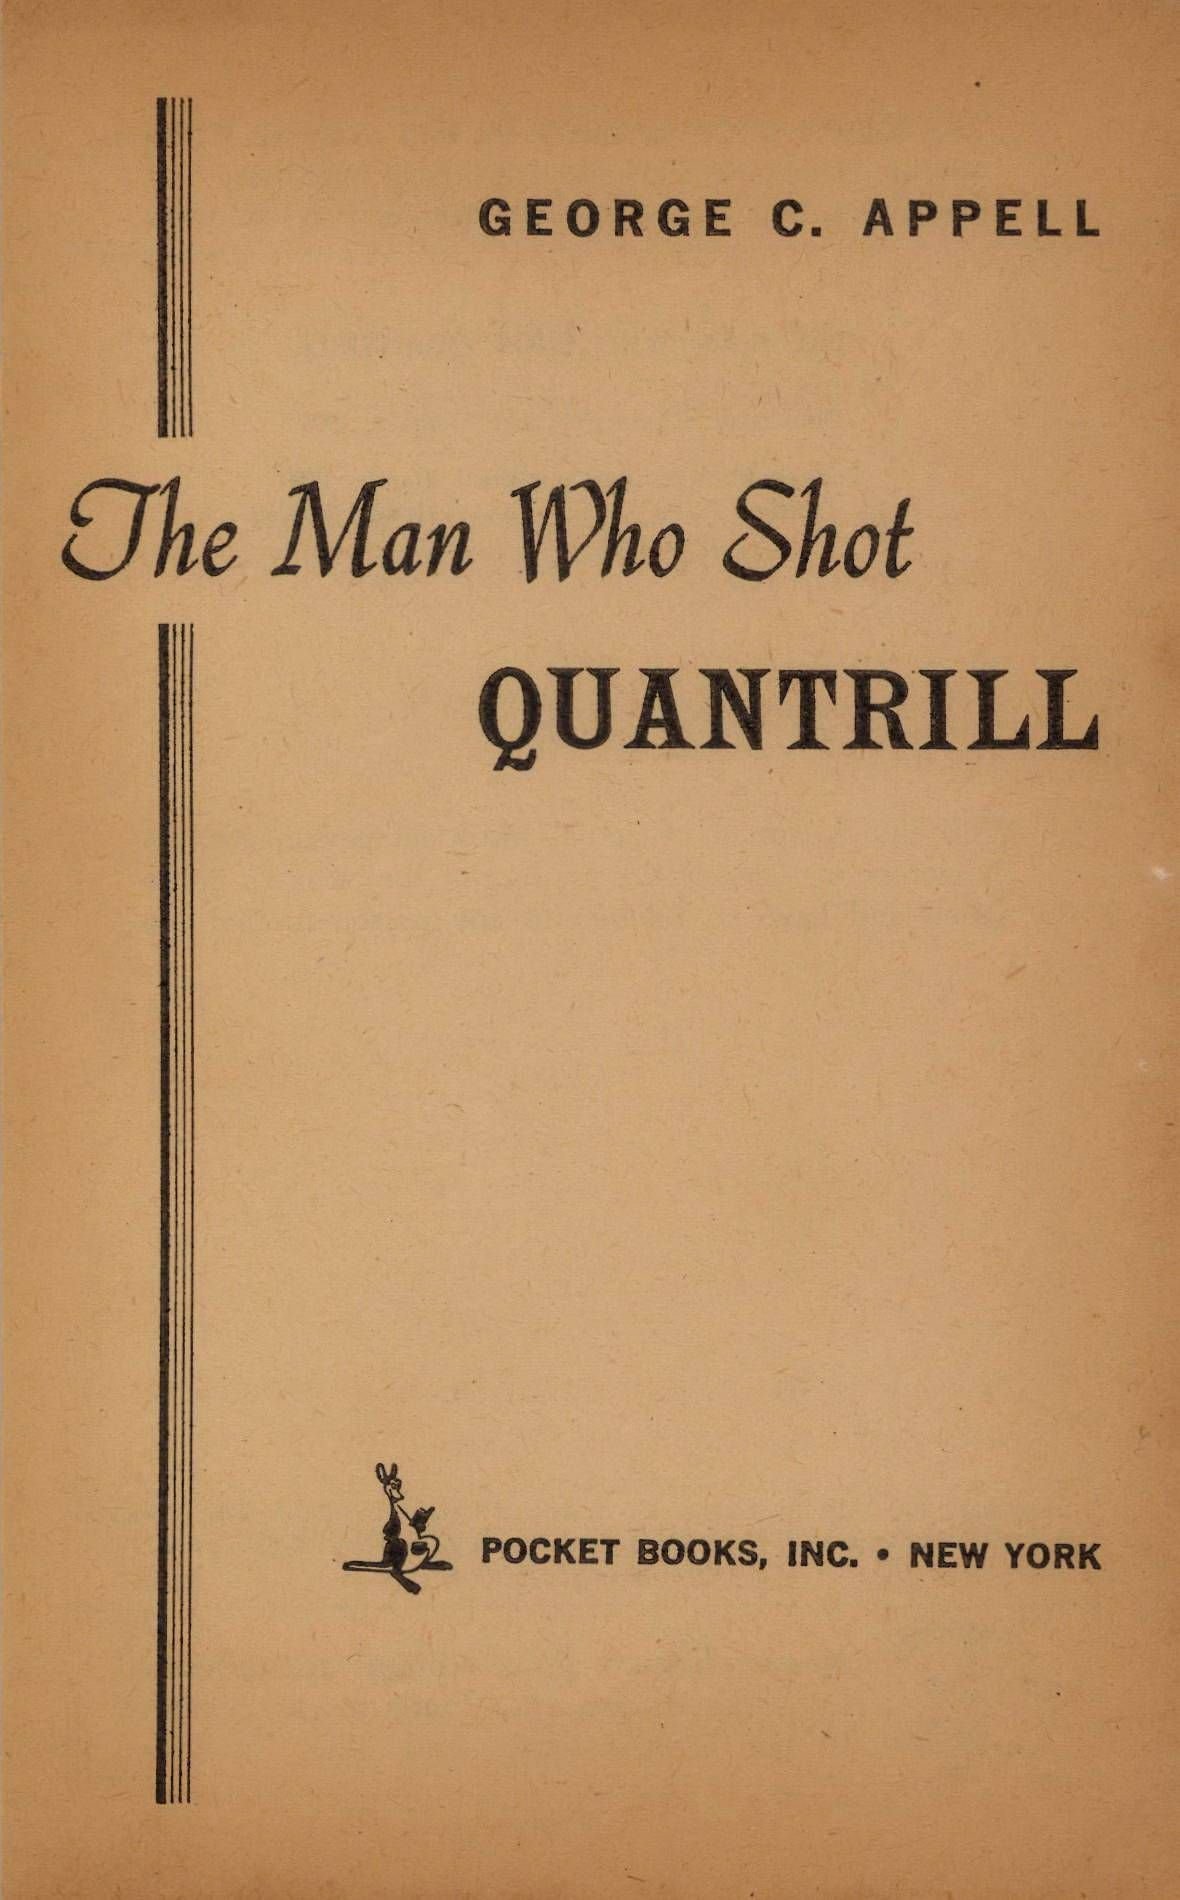 The Man Who Shot Quantrill by George C Appell page 004.jpg